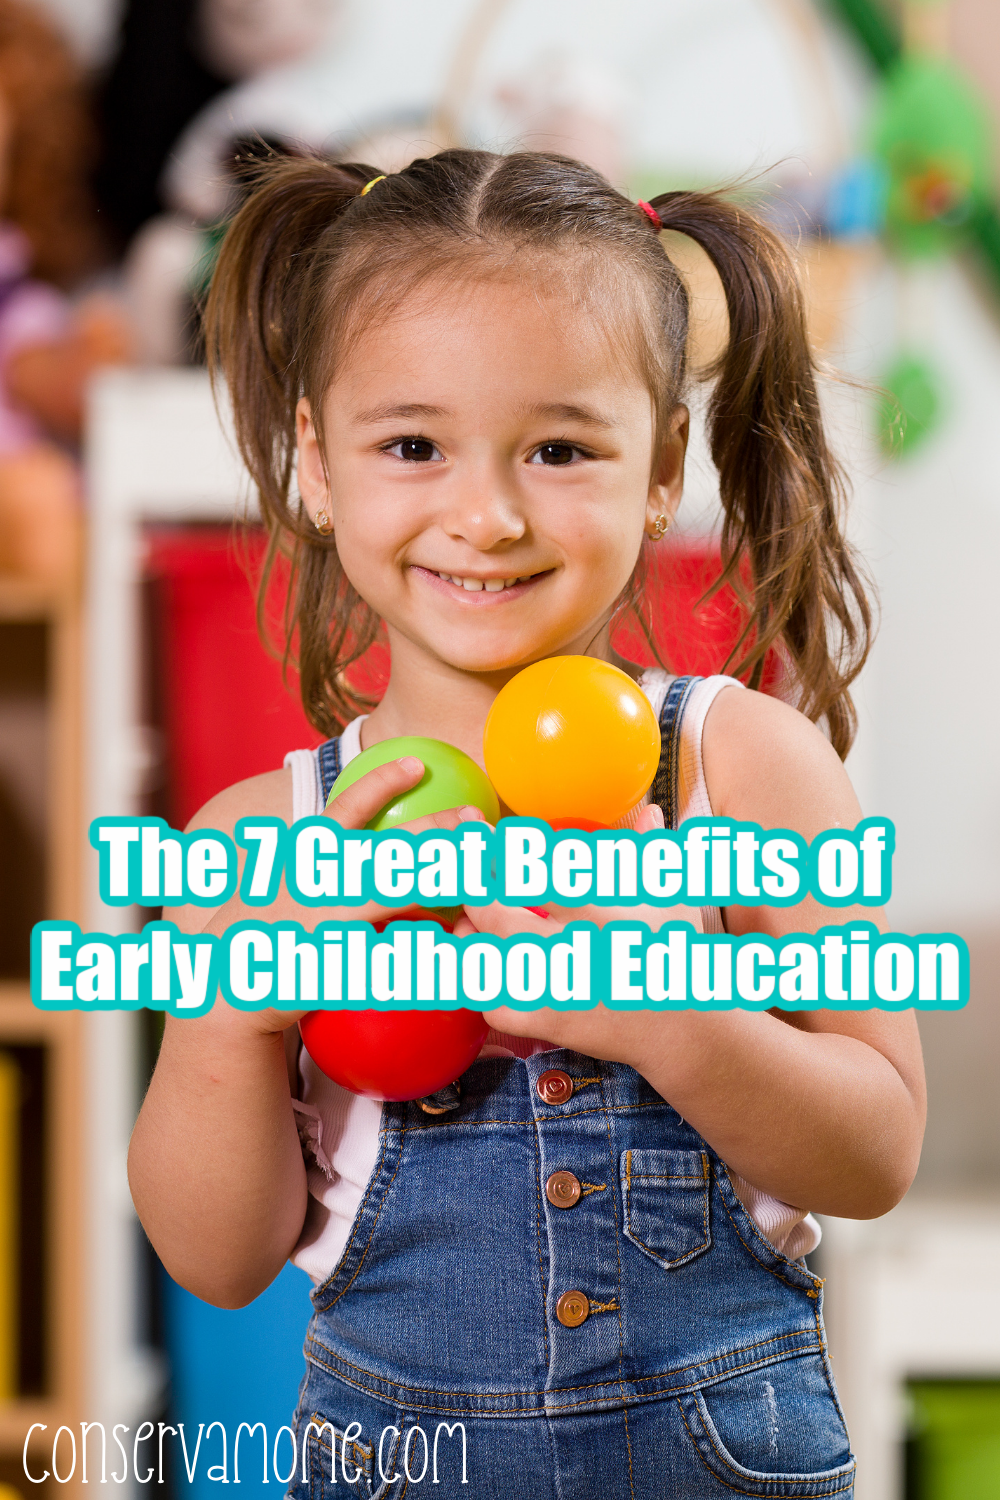 The 7 Great Benefits of Early Childhood Education